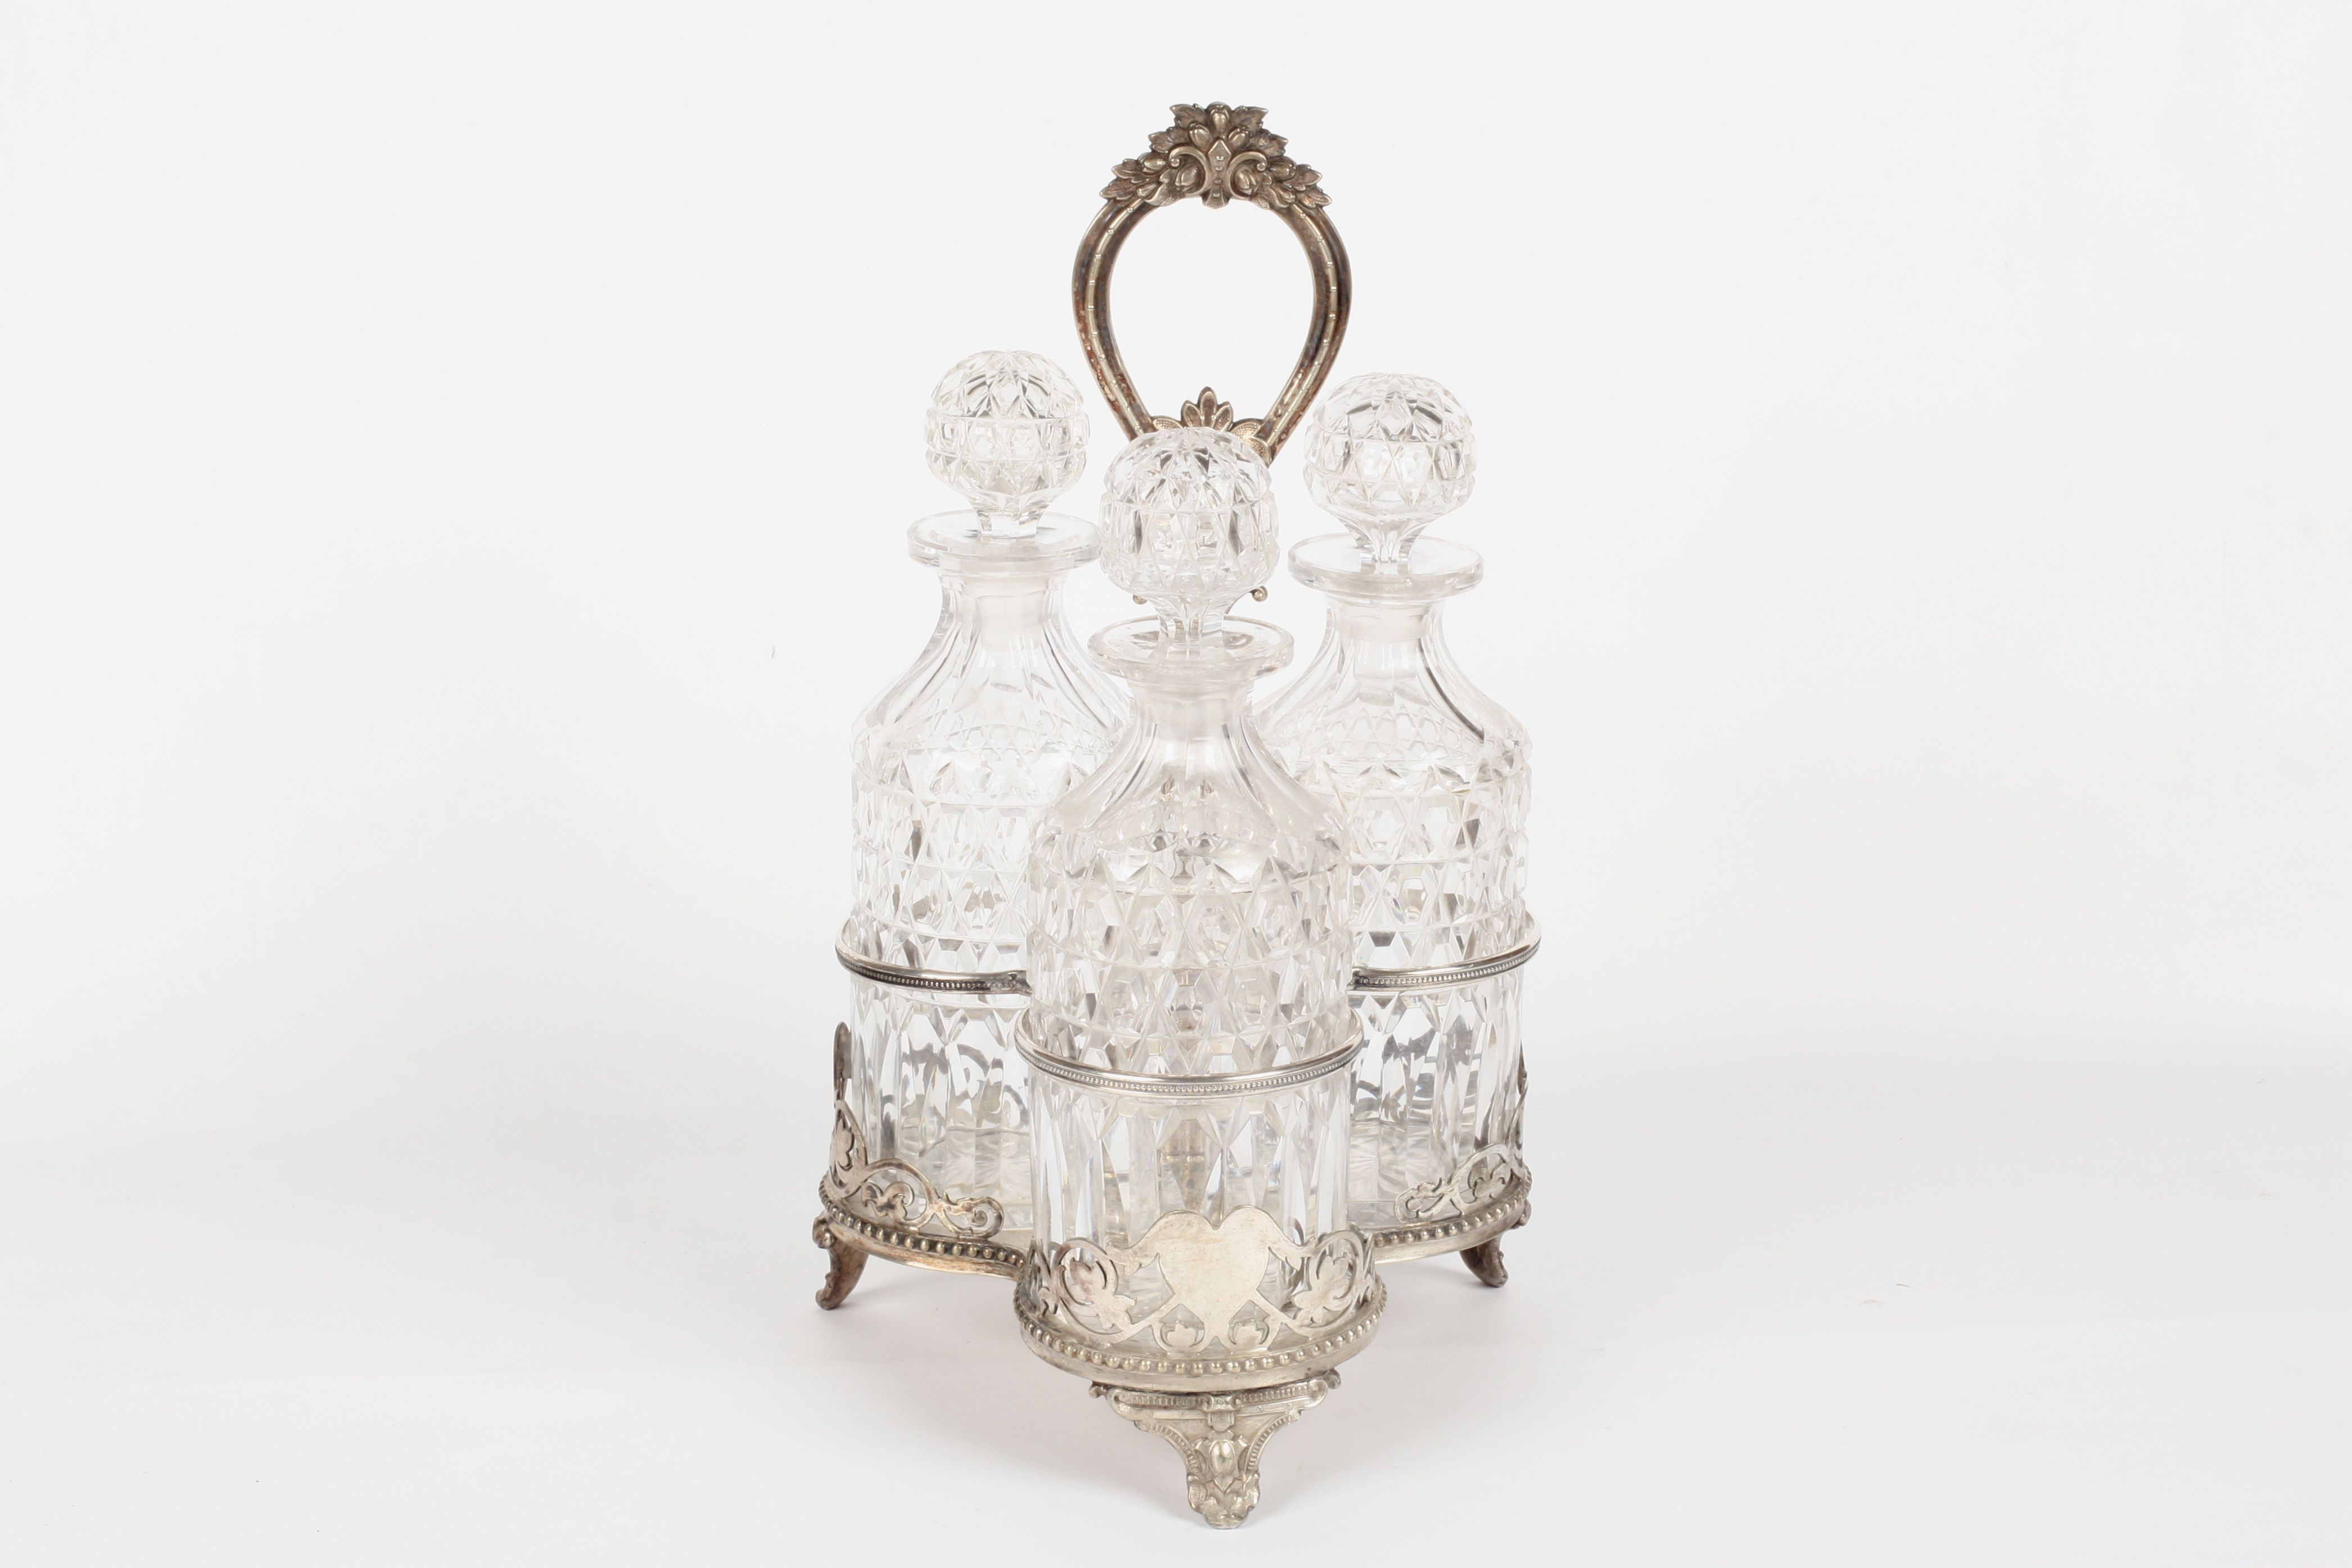 A Victorian silver plated trefoil decanter stand, with three cut glass decanters and stoppers. The